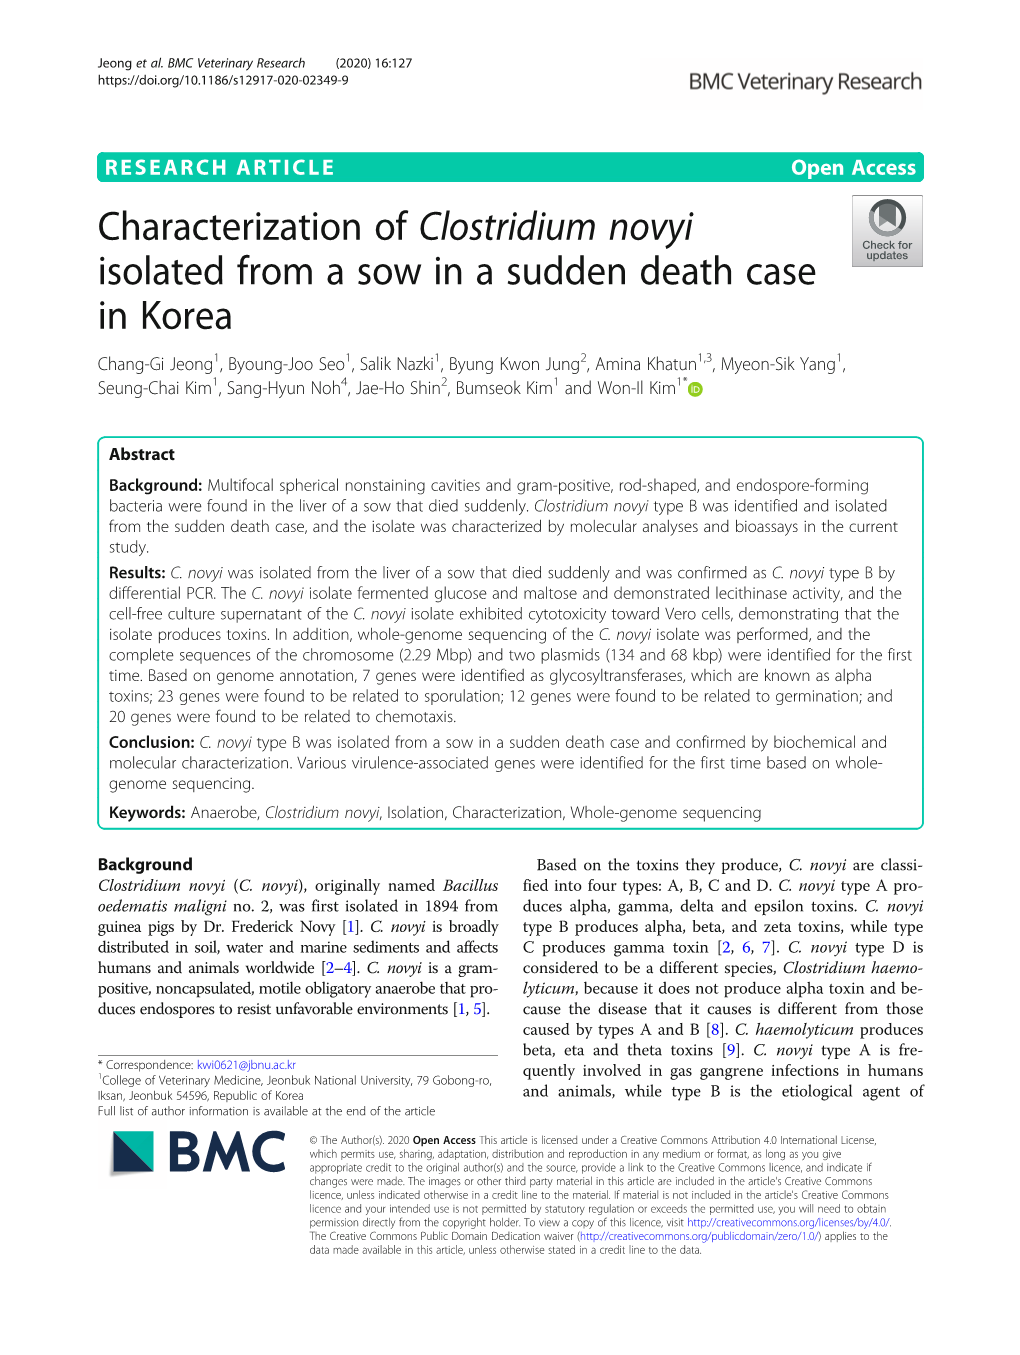 Characterization of Clostridium Novyi Isolated from a Sow in a Sudden Death Case in Korea